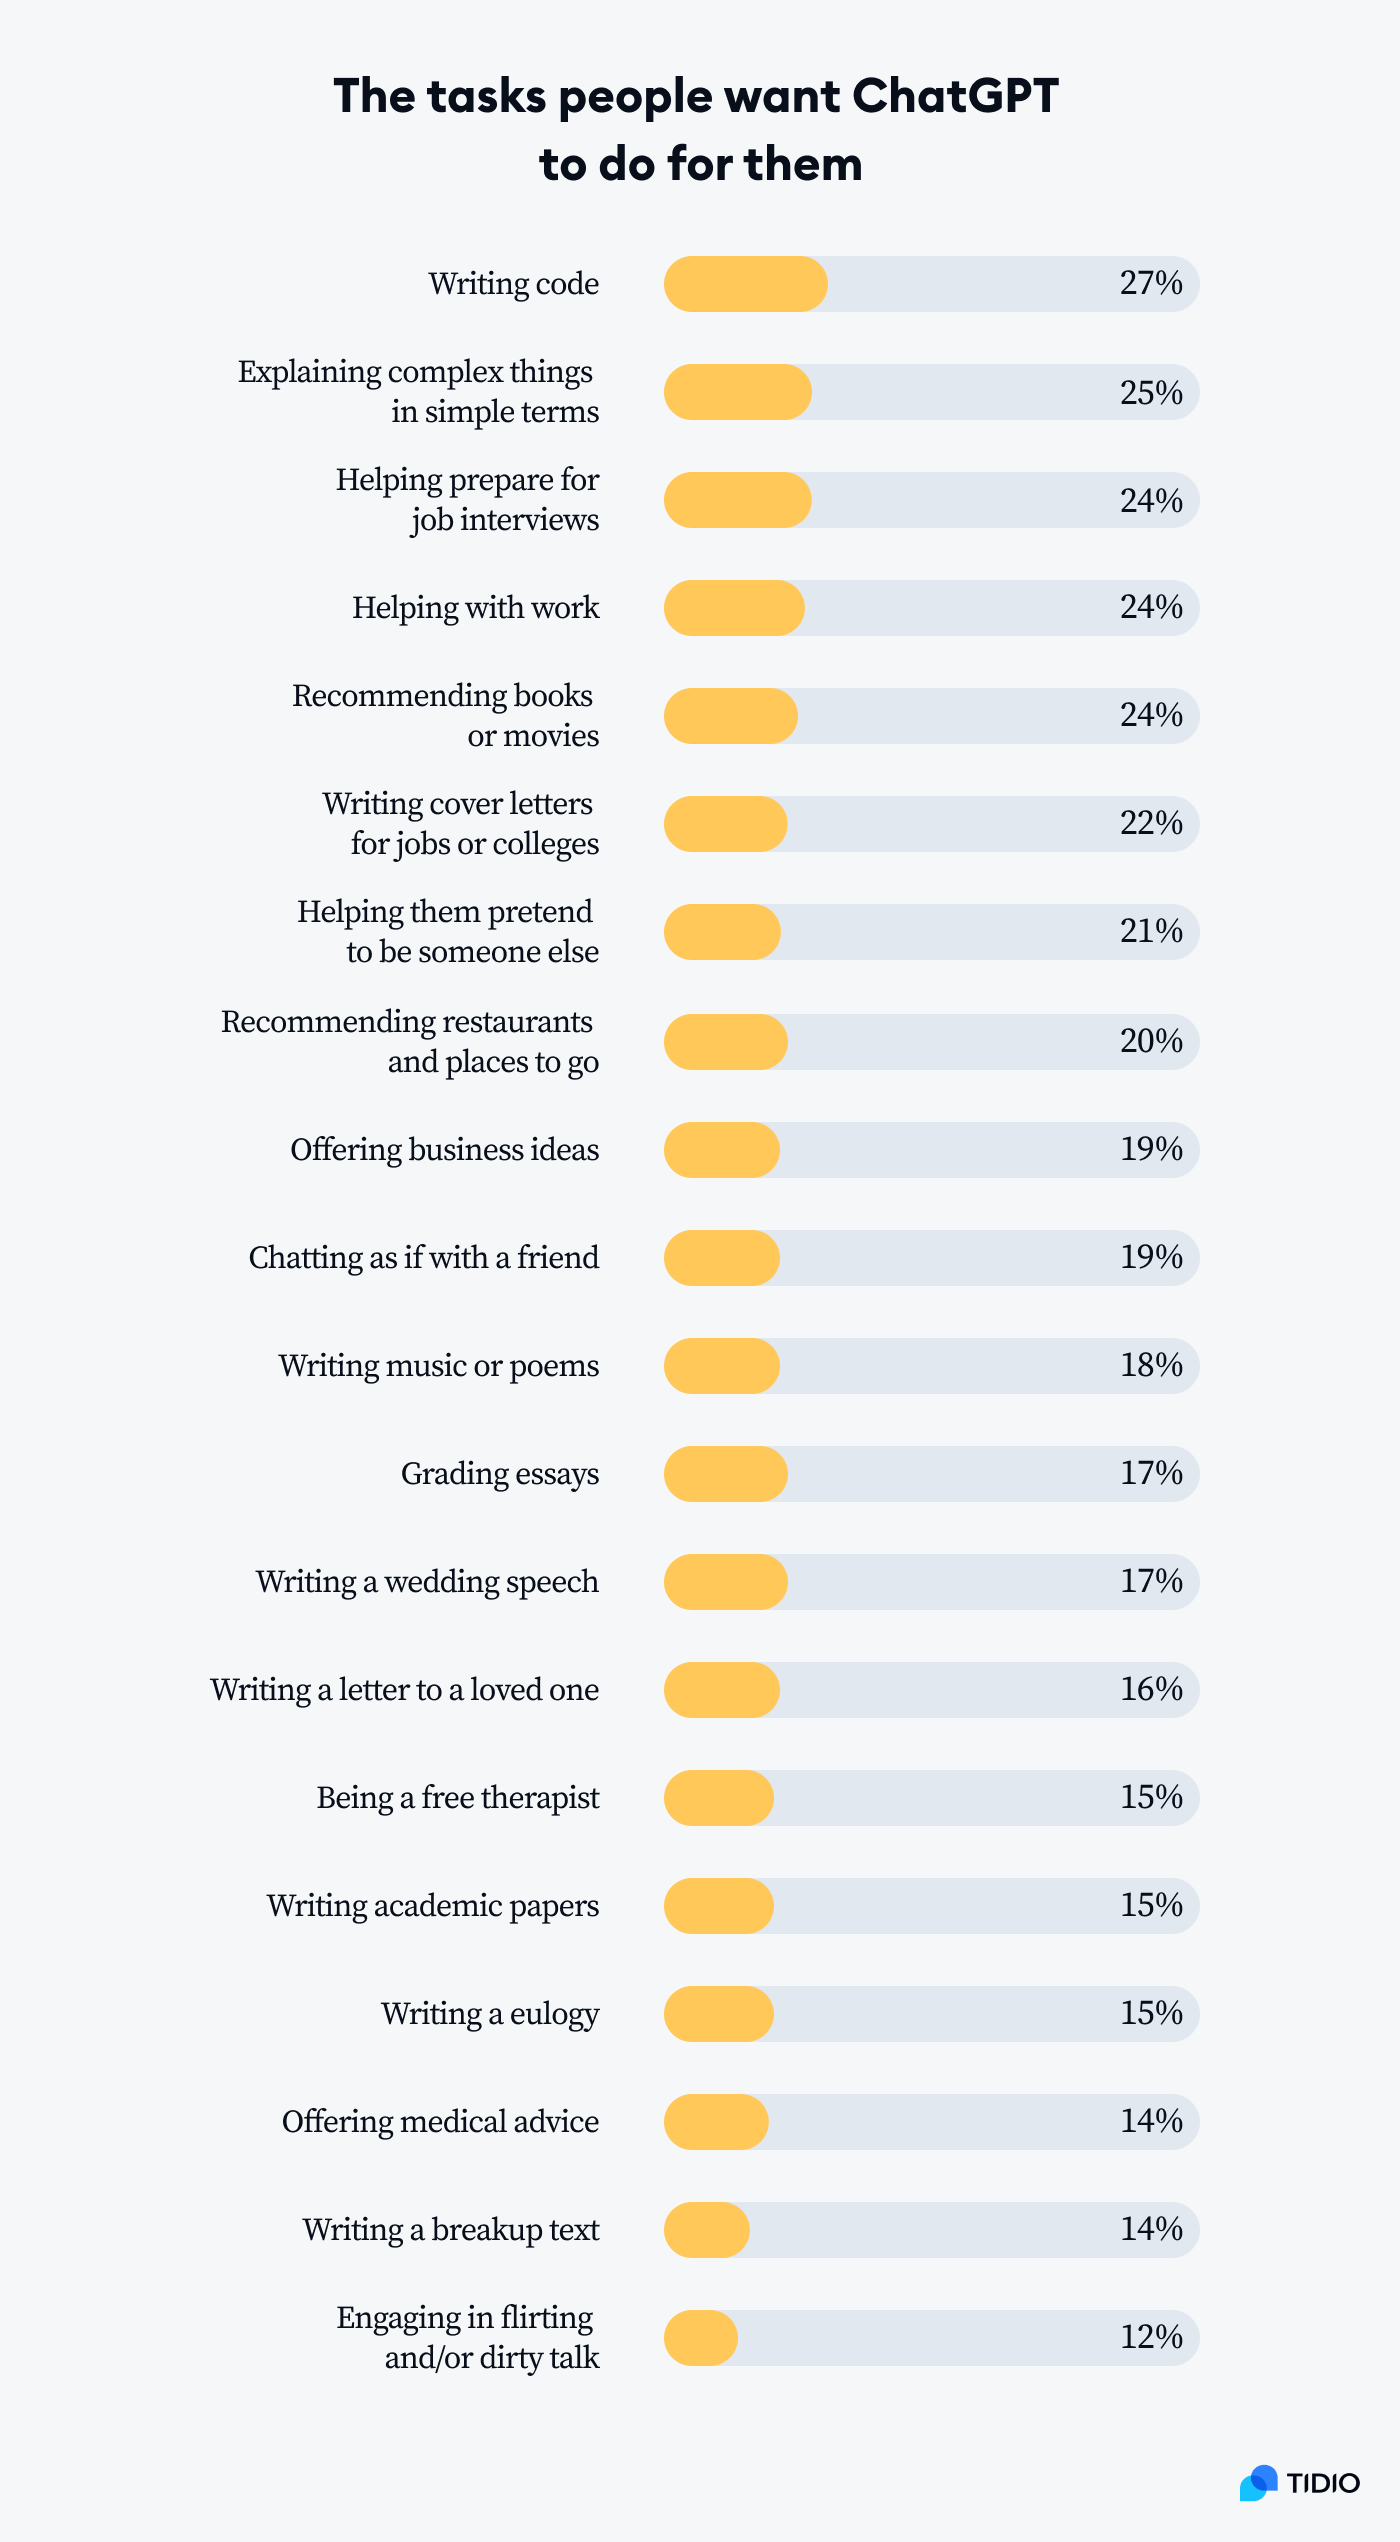 The tasks people want ChatGPT to do for them infographic